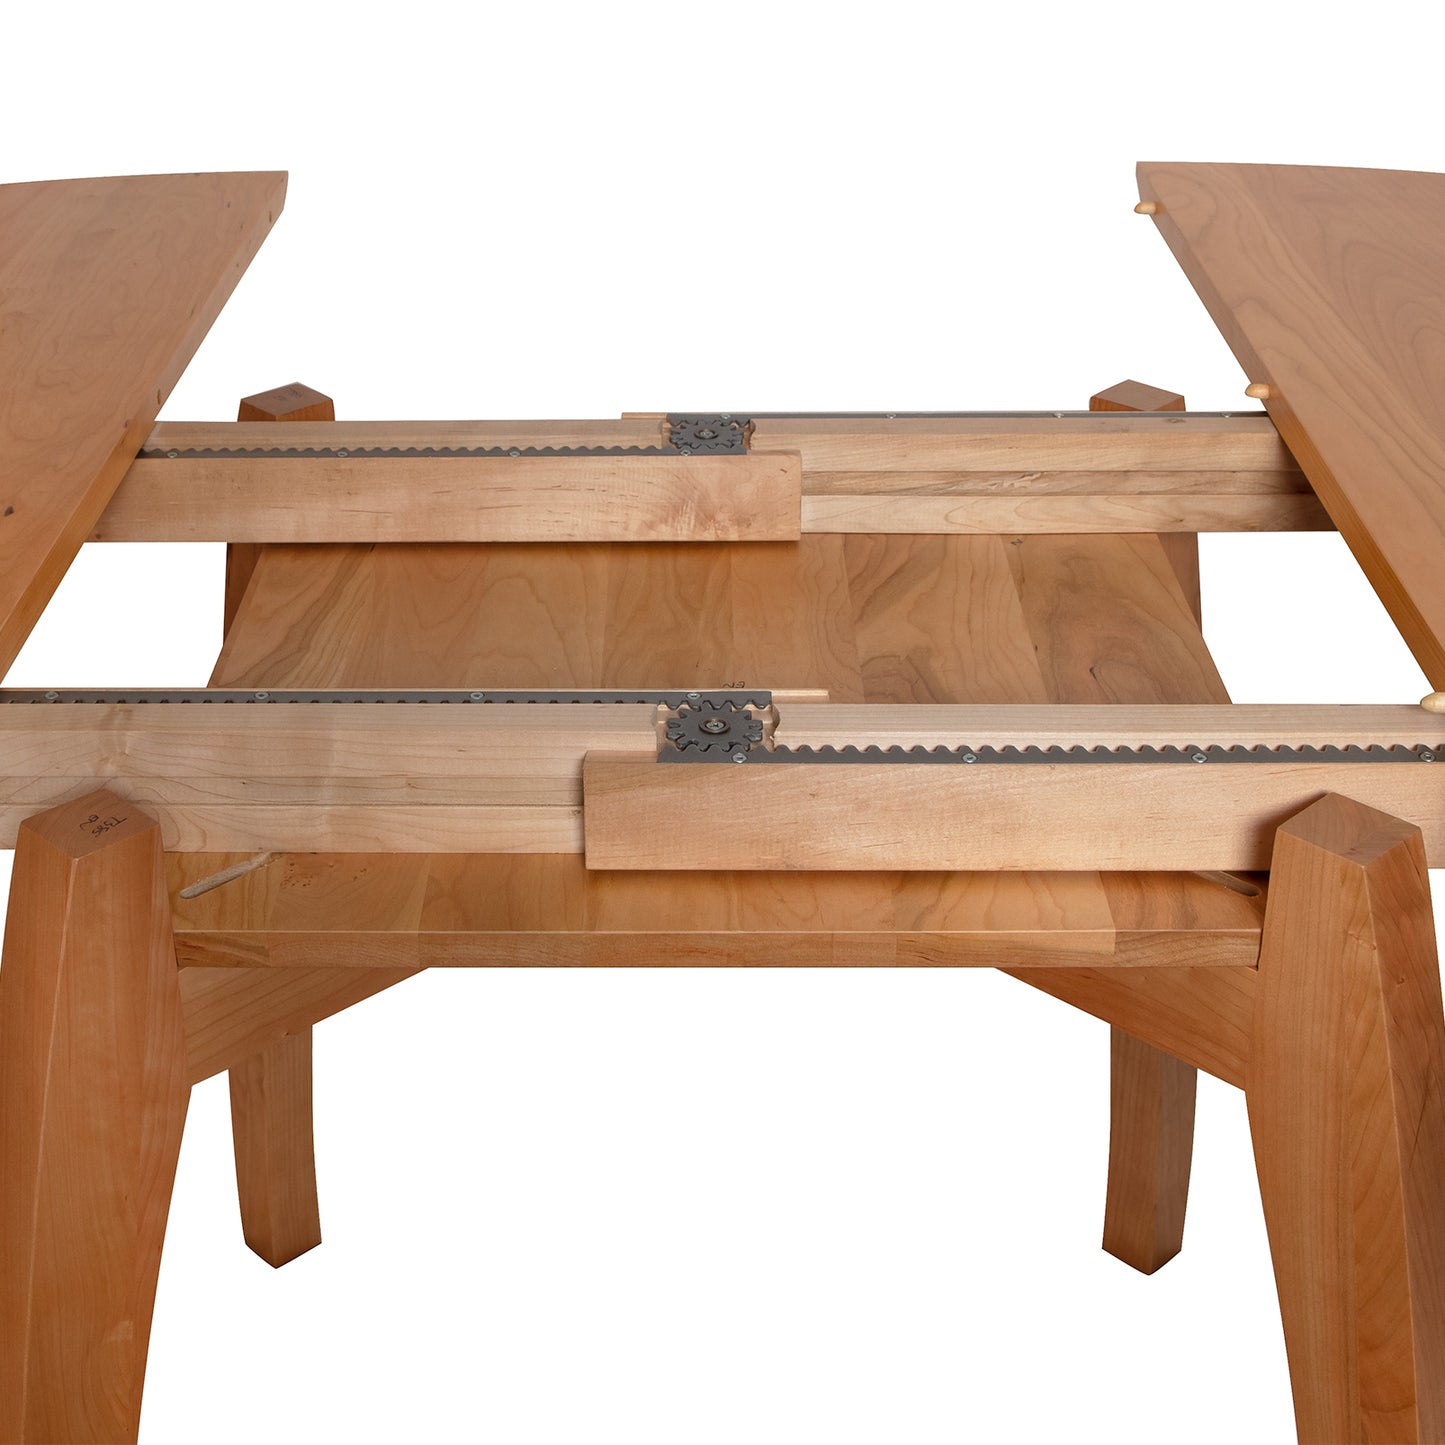 A wooden table with a fold out table top.